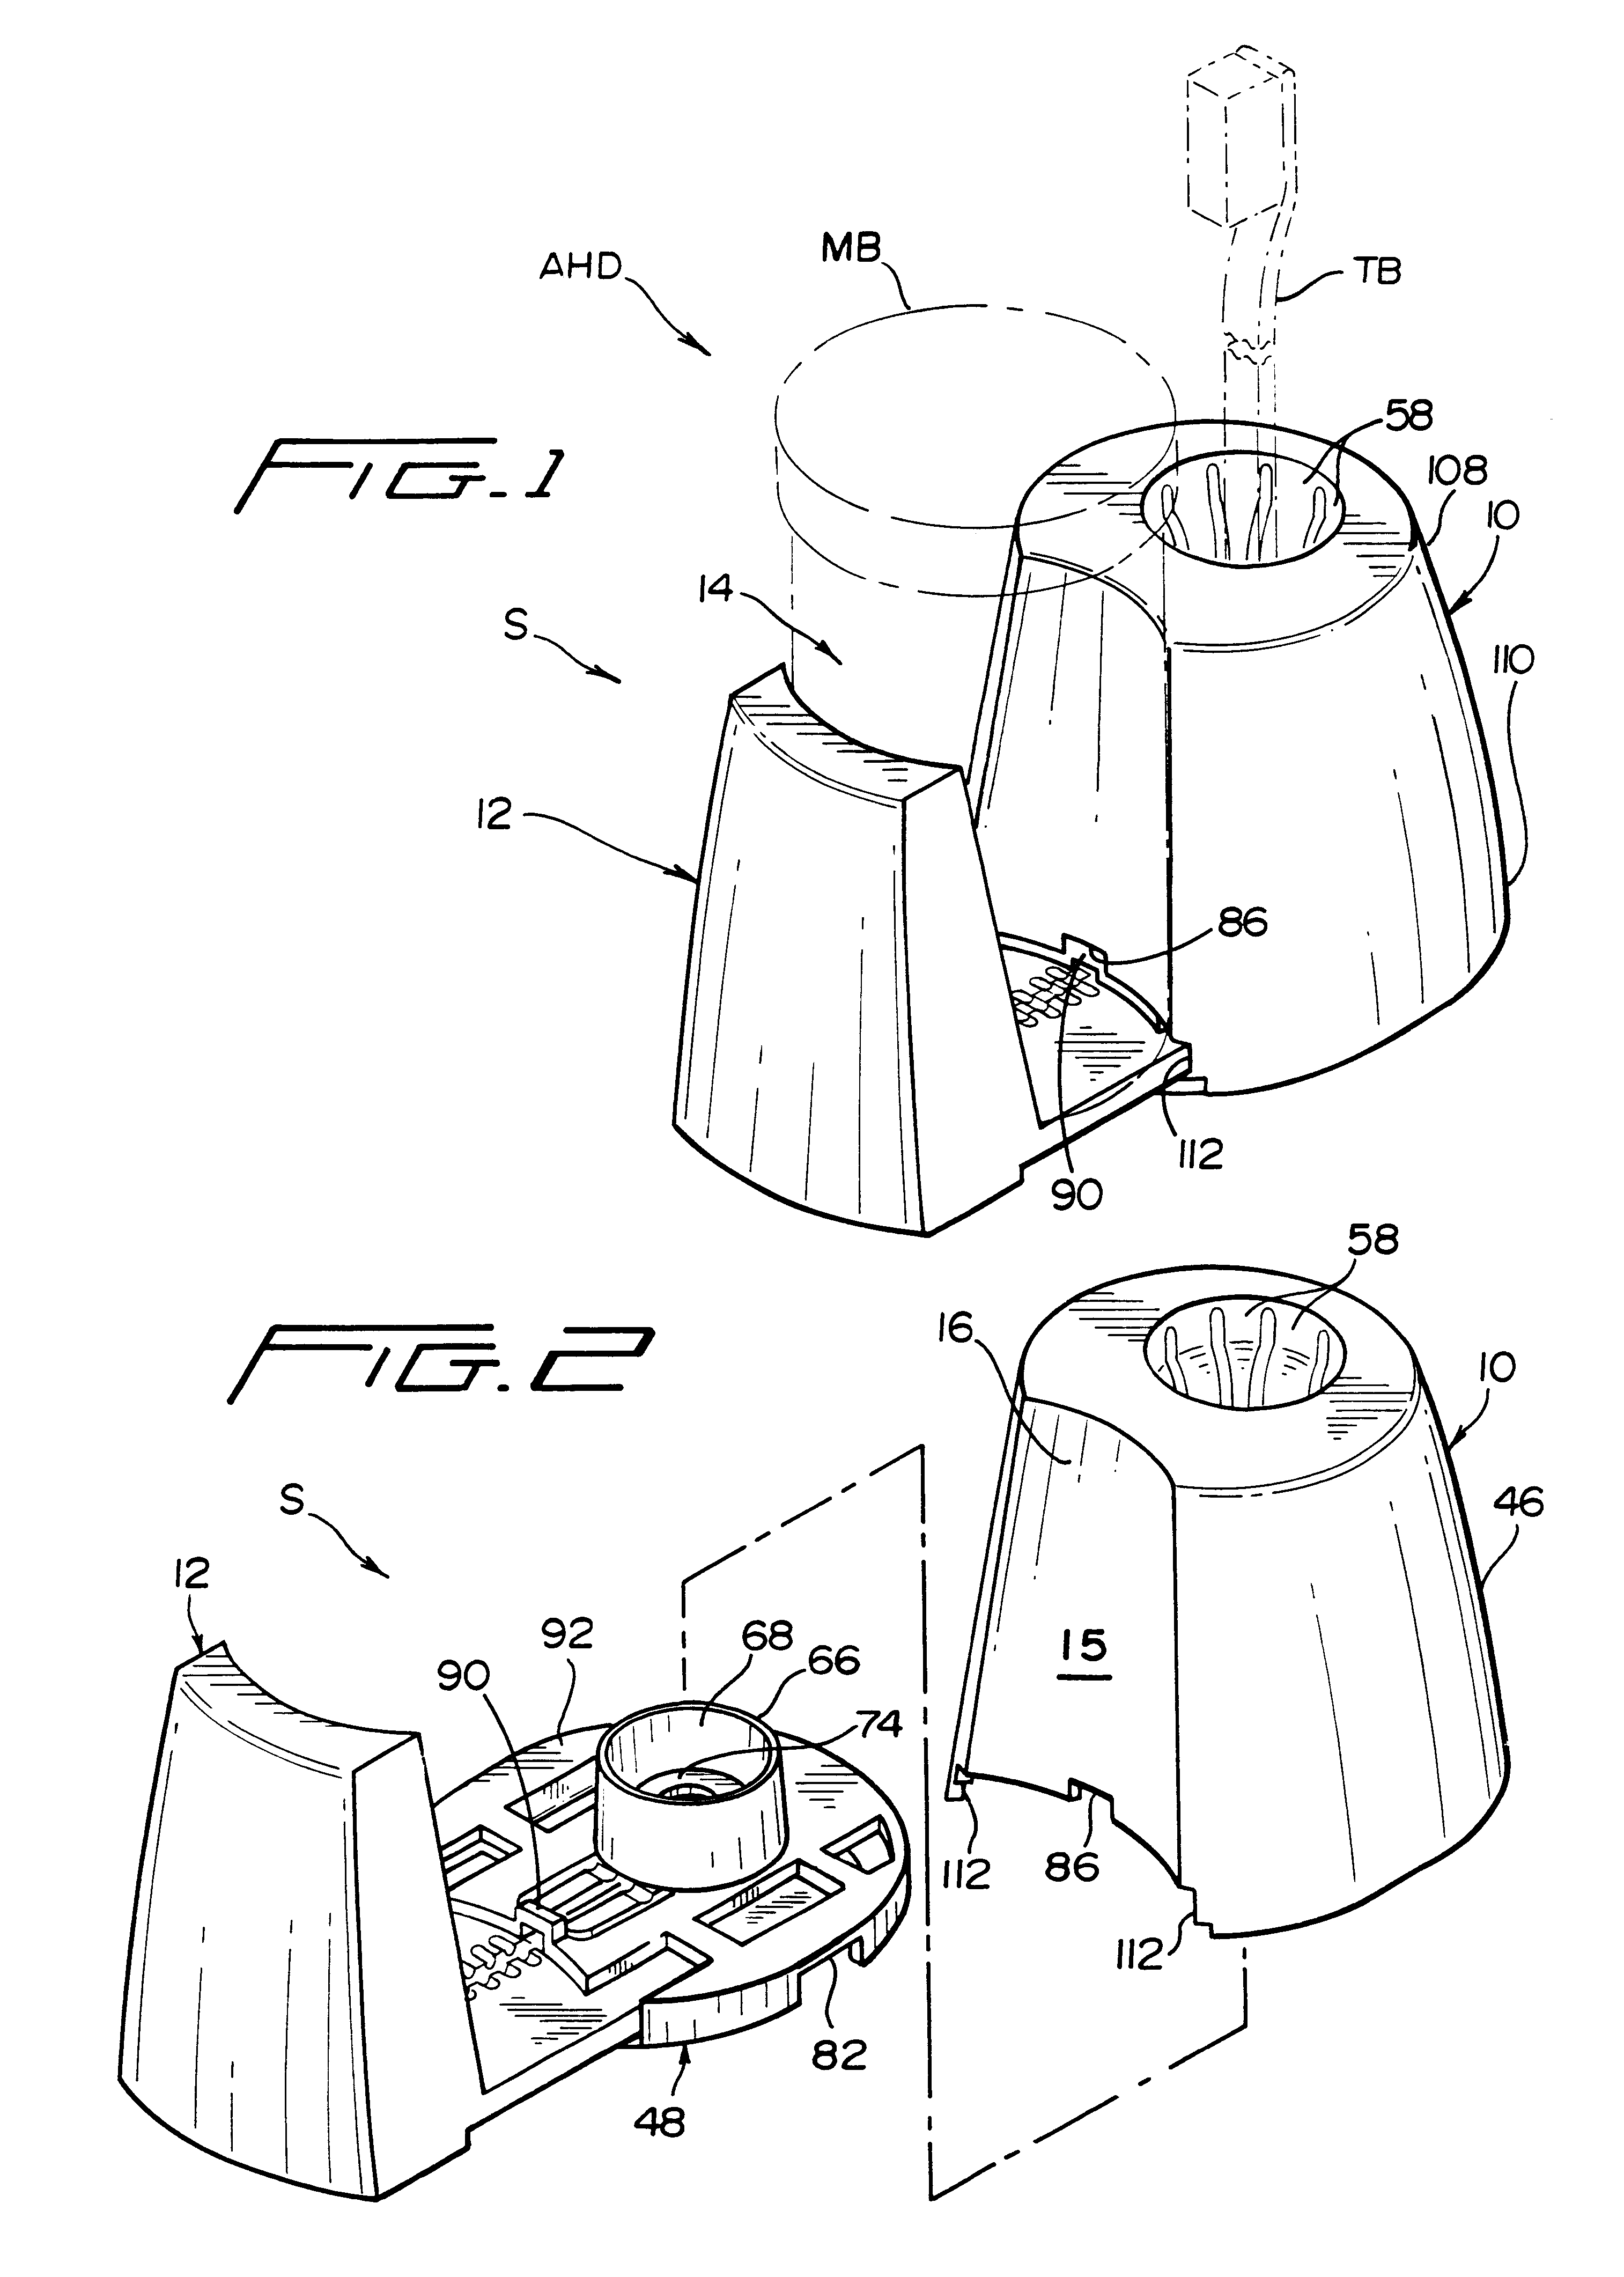 Adjustable health improvement device for modifying a daily behavior by reminding a person to take medication